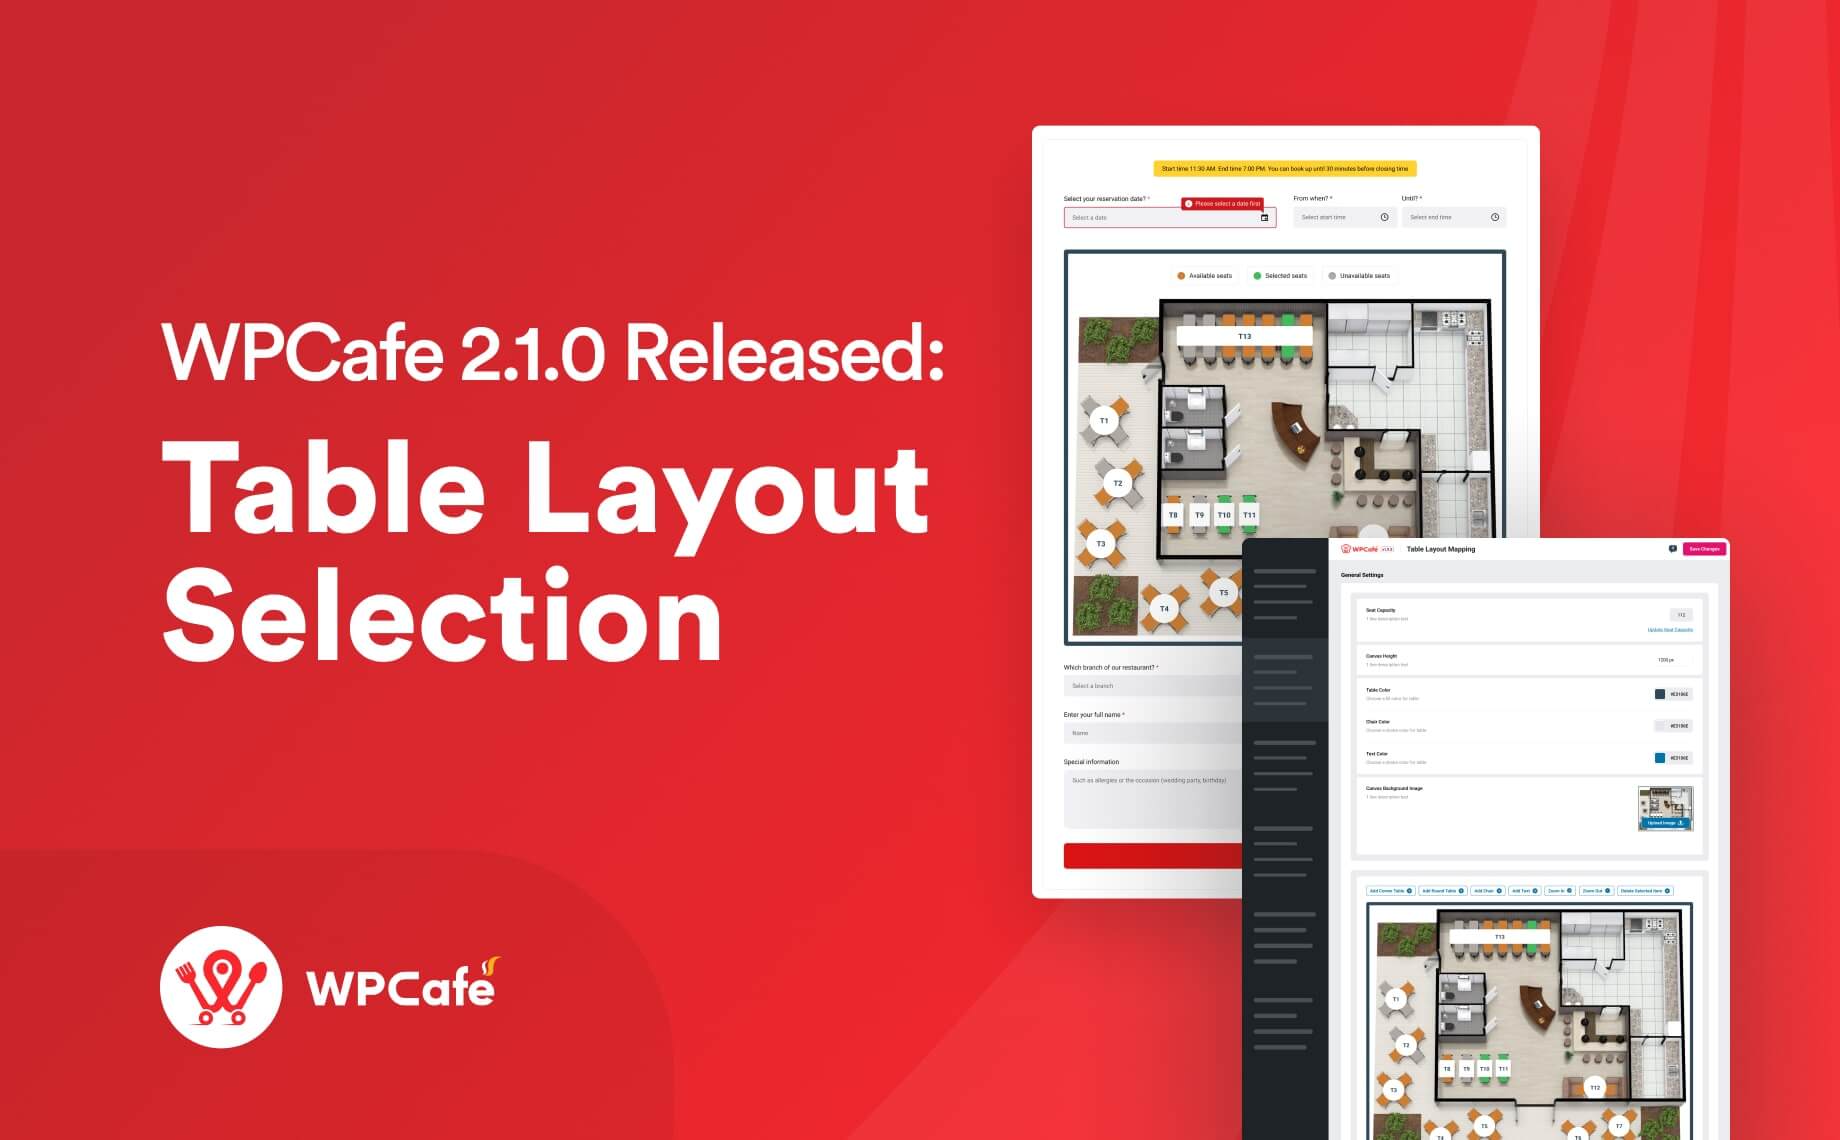  WPCafe 2.1.0 Brings Exciting New Changes: Table Layout Selection